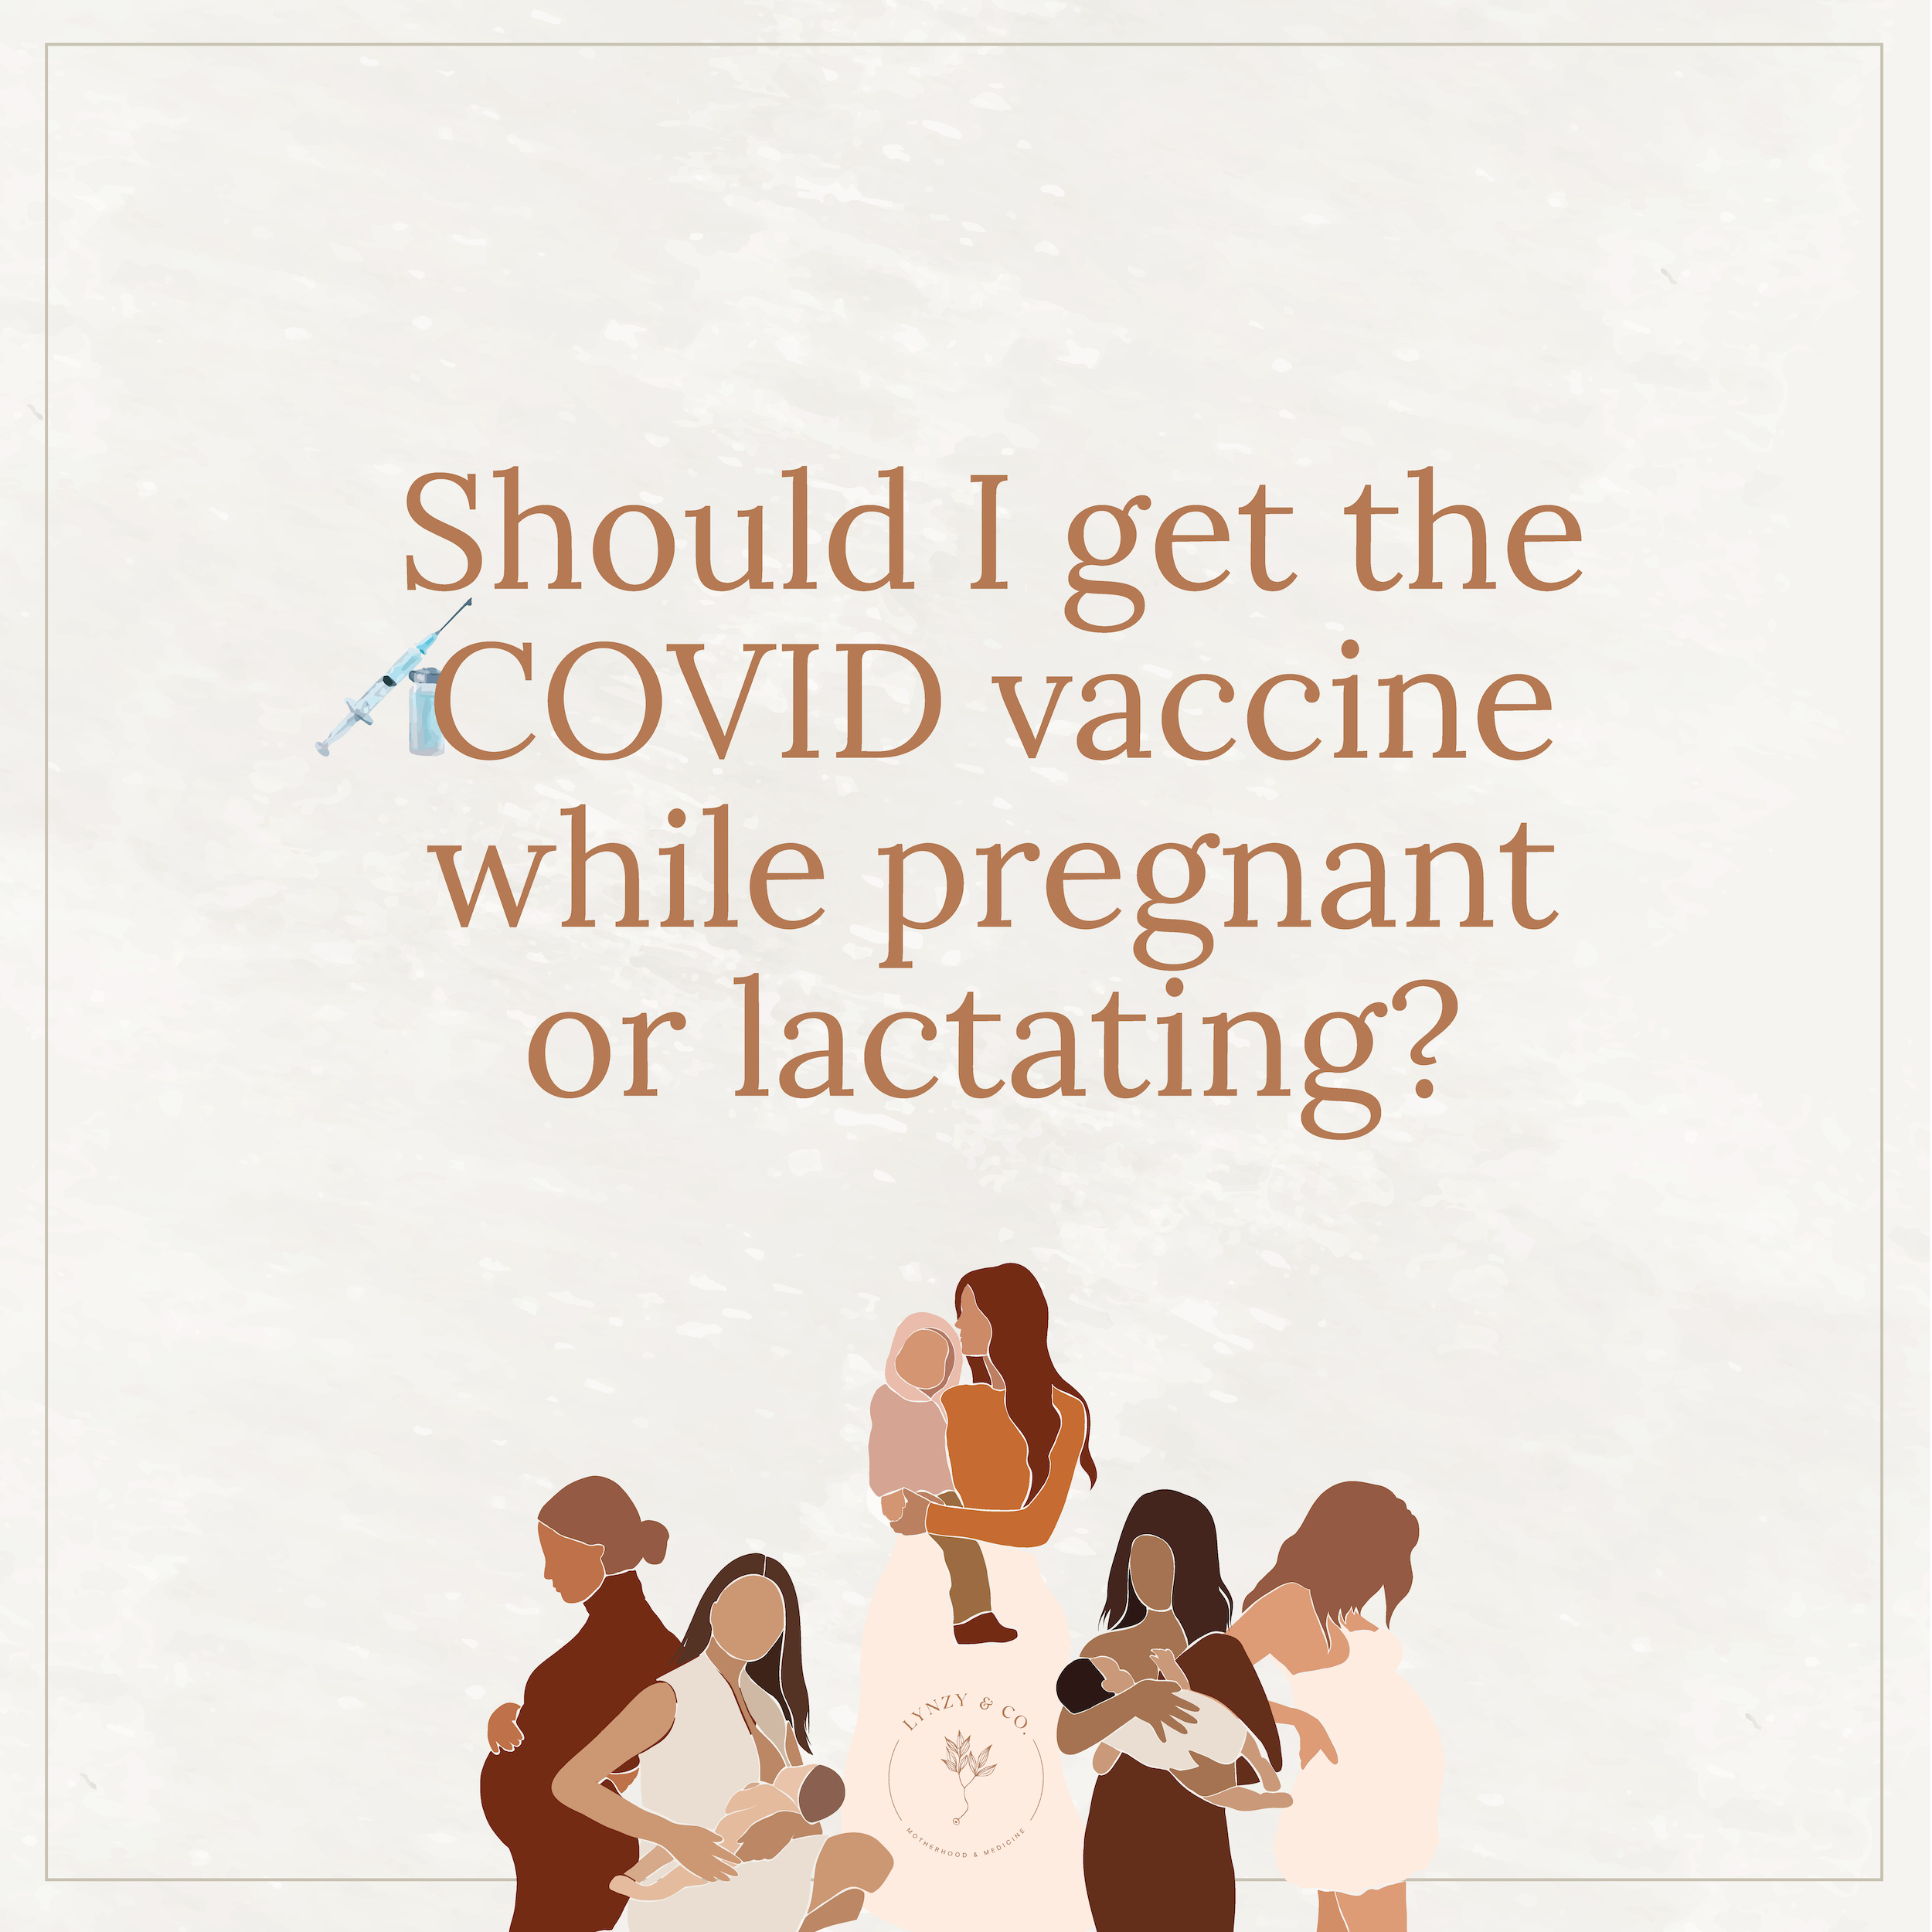 Should I Get the COVID Vaccine While Pregnant or Lactating?